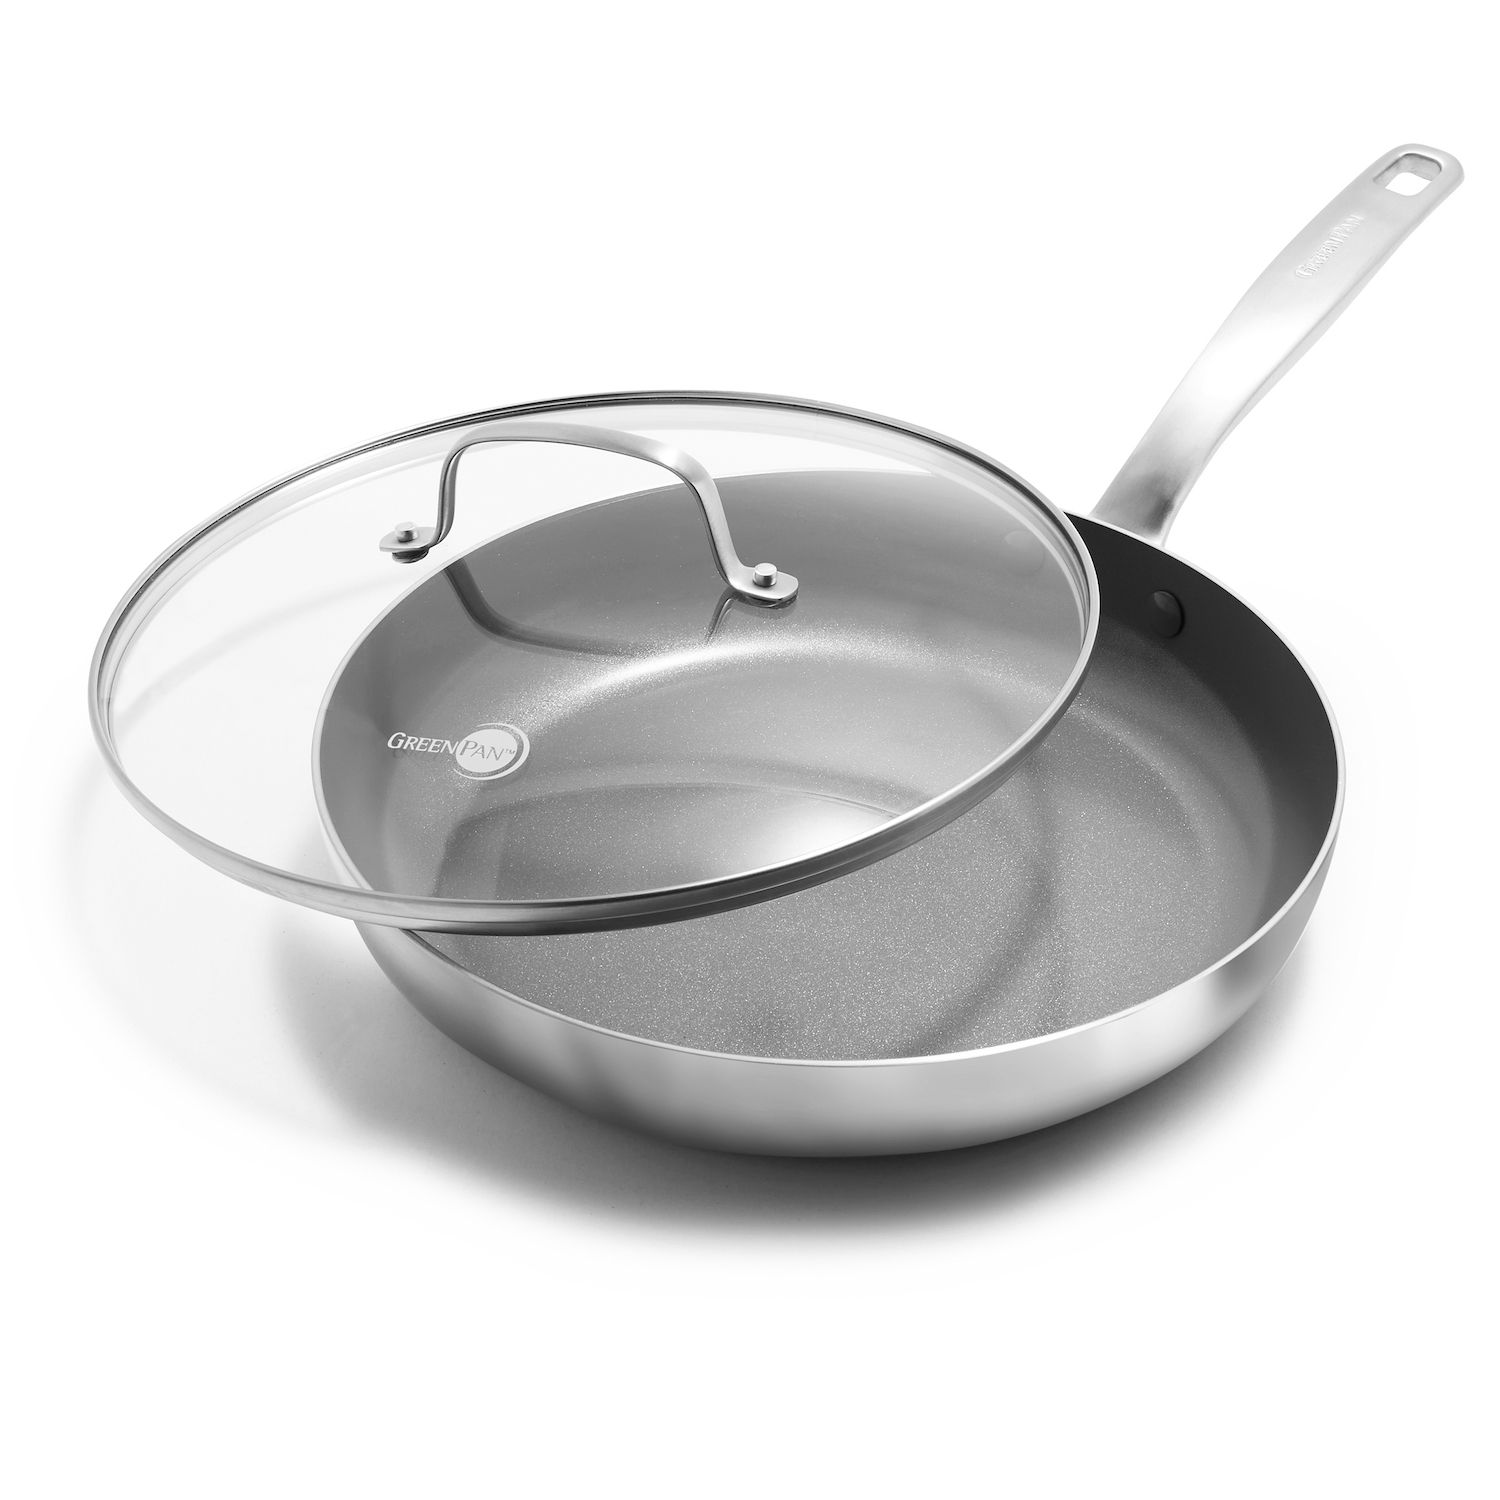 Die Casted All Purpose Non Stick Griddle Pan – UTNSL